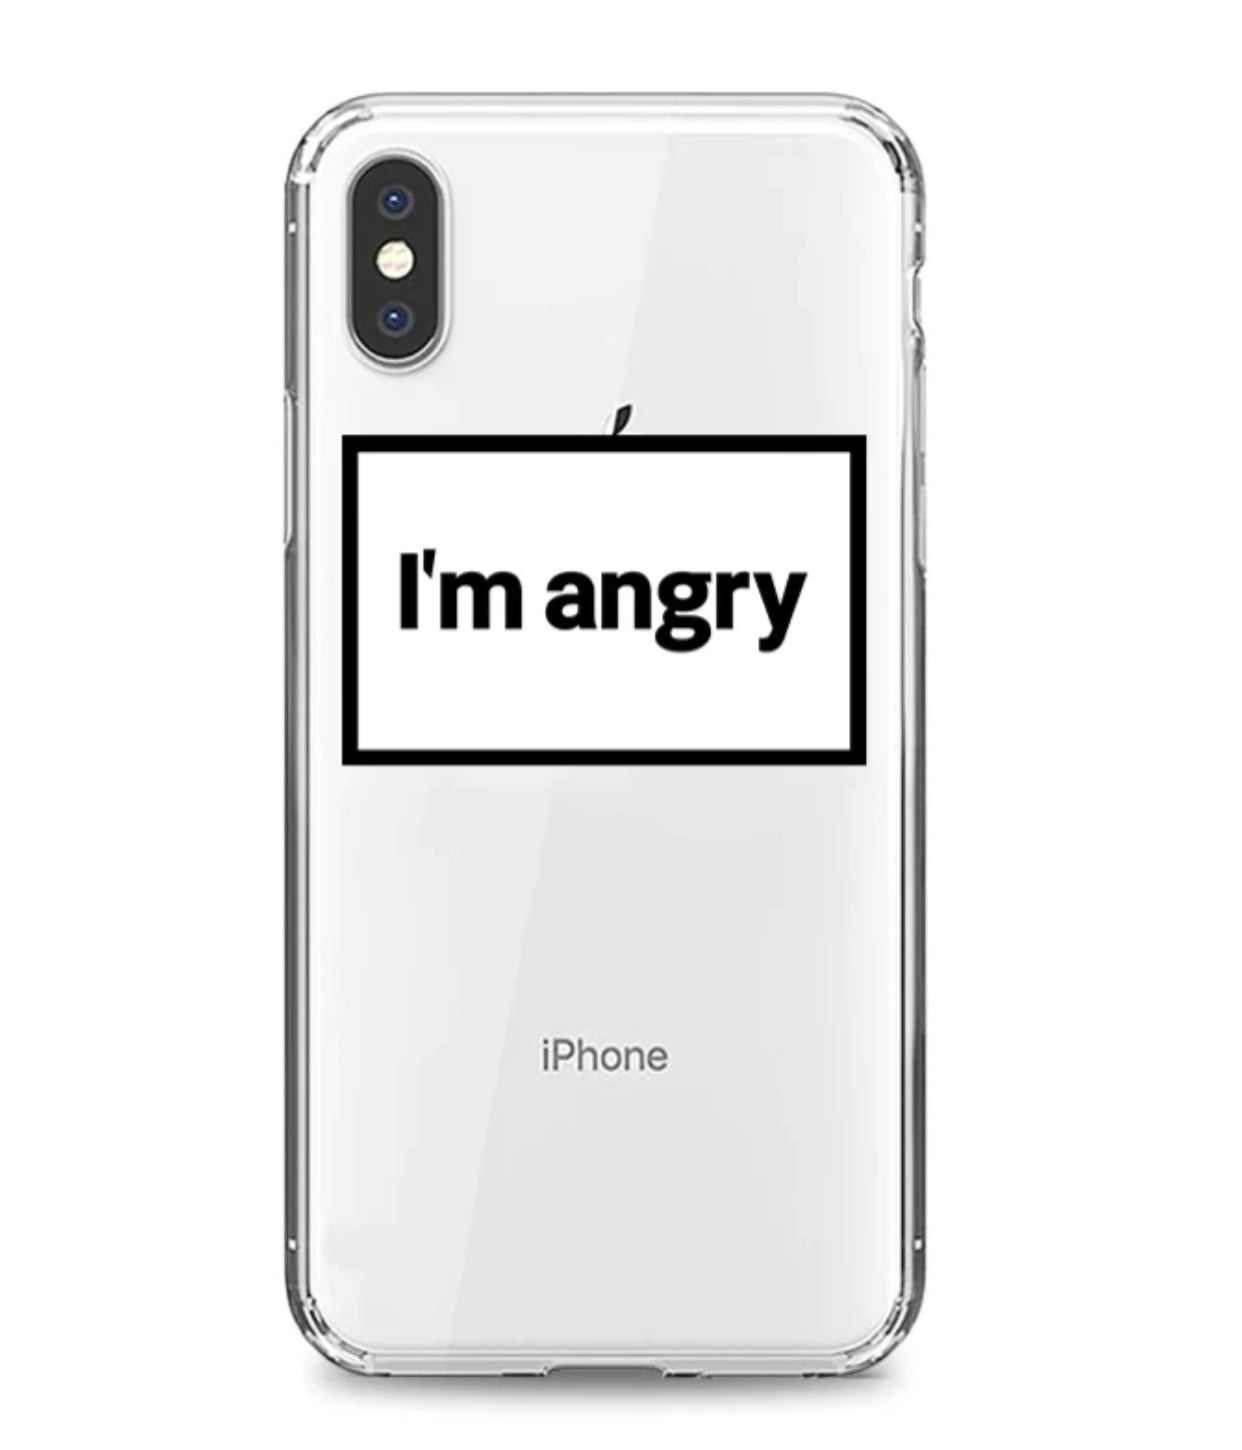 " i'm angry" case